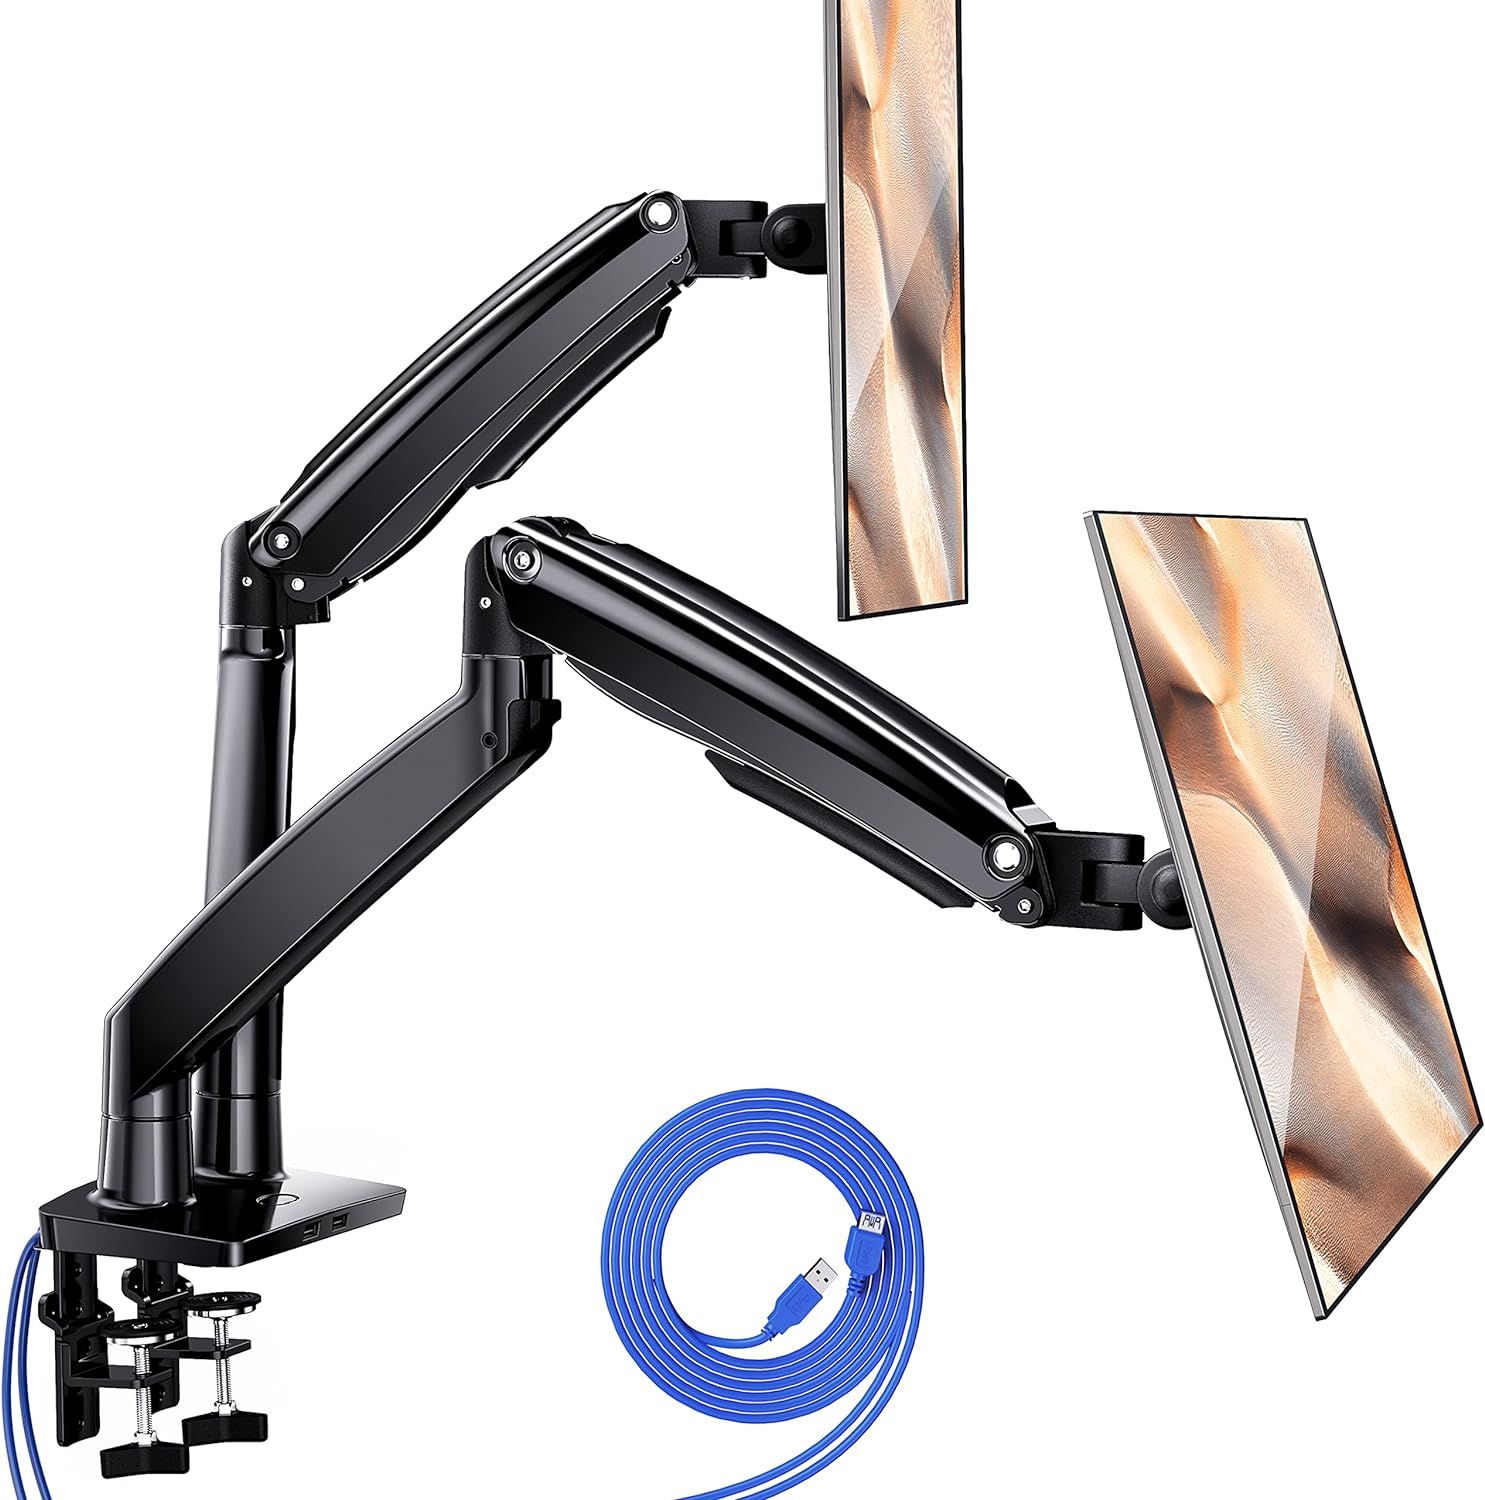 Ergear Dual Monitor Stand Mount, Ultrawide 13-35 Inch Height Adjustable Computer Screen Gas Spring Monitor Arm Desk Mount Full Motion, Each Arm Holds up to 26.4lbs